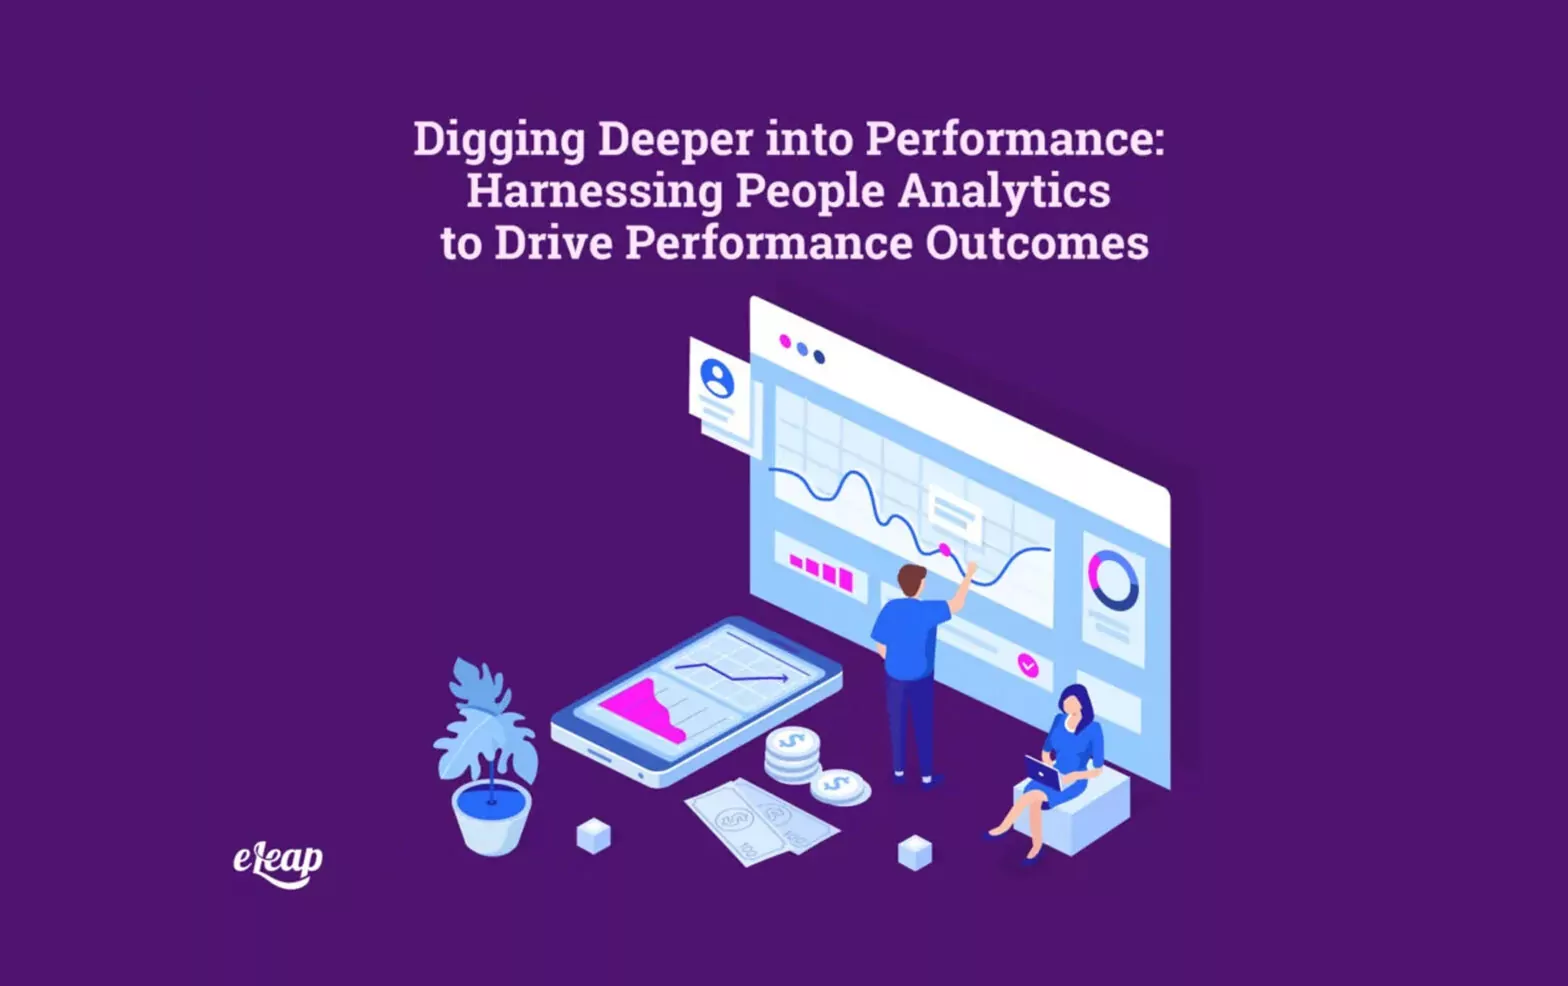 Digging Deeper into Performance: Harnessing People Analytics to Drive Performance Outcomes